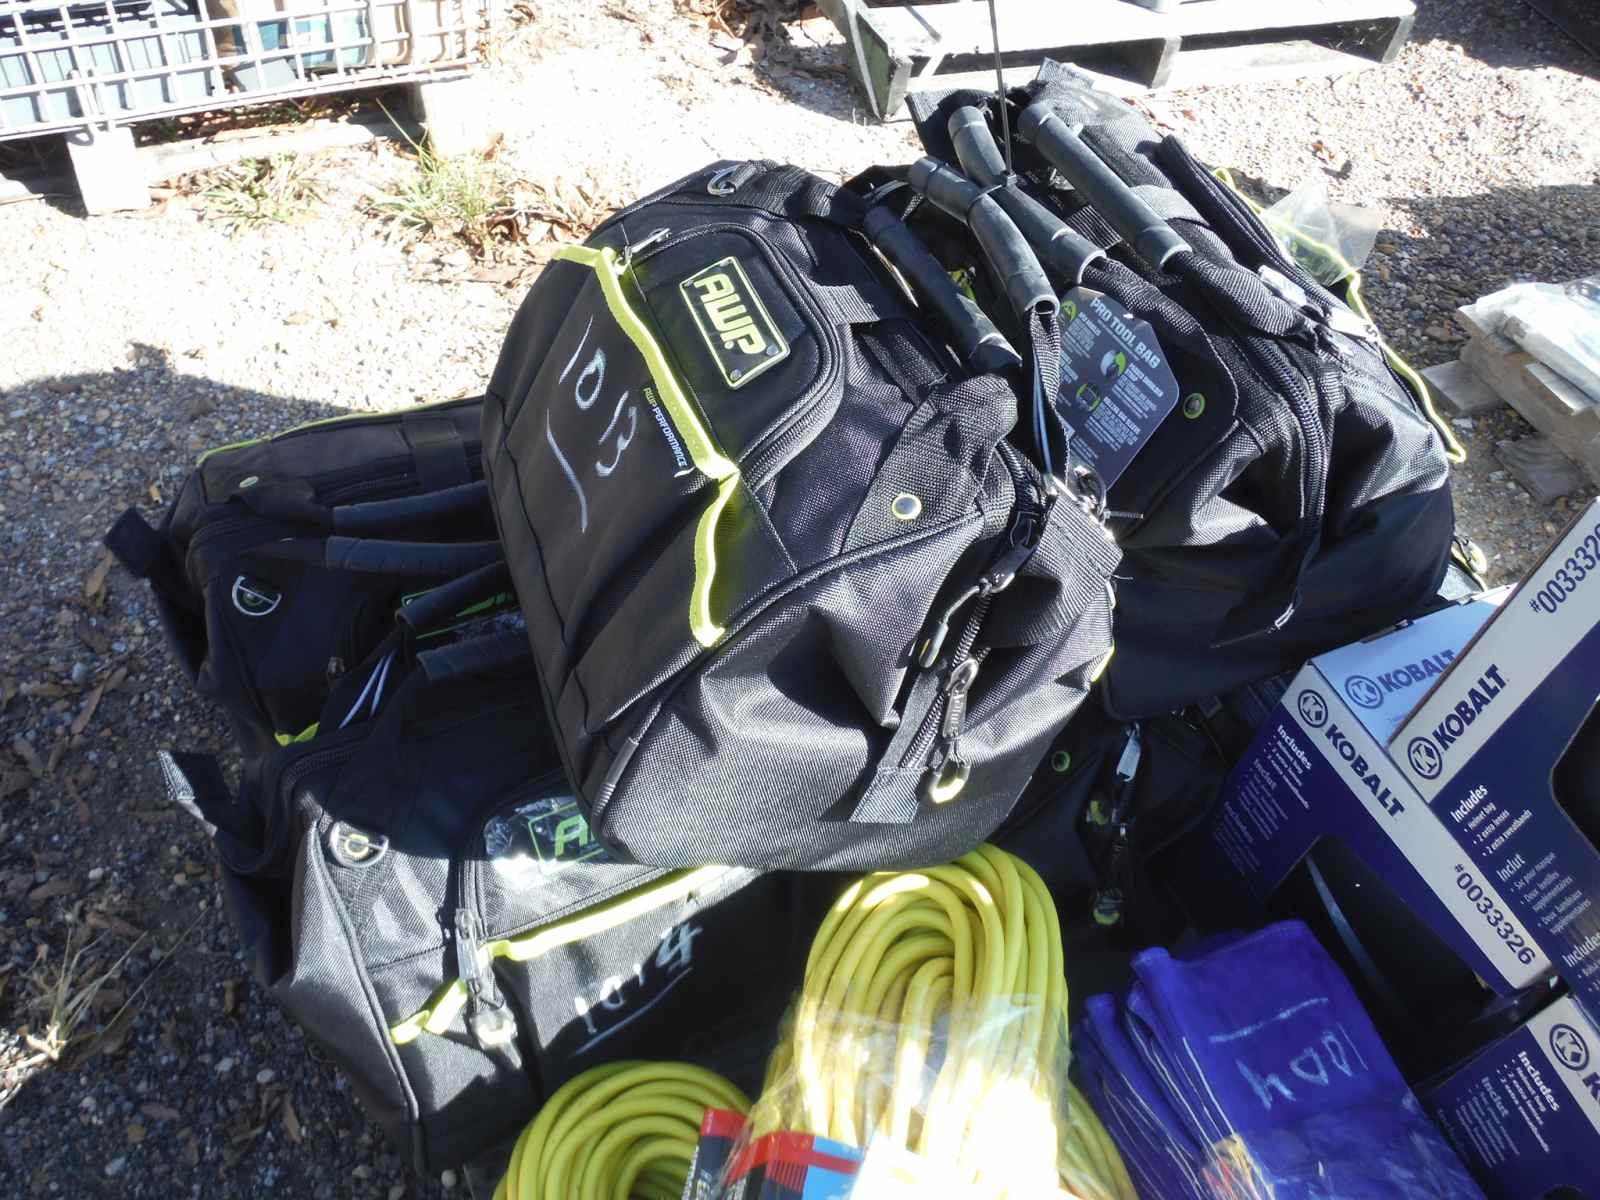 (2) 14" Pro Tool Bags